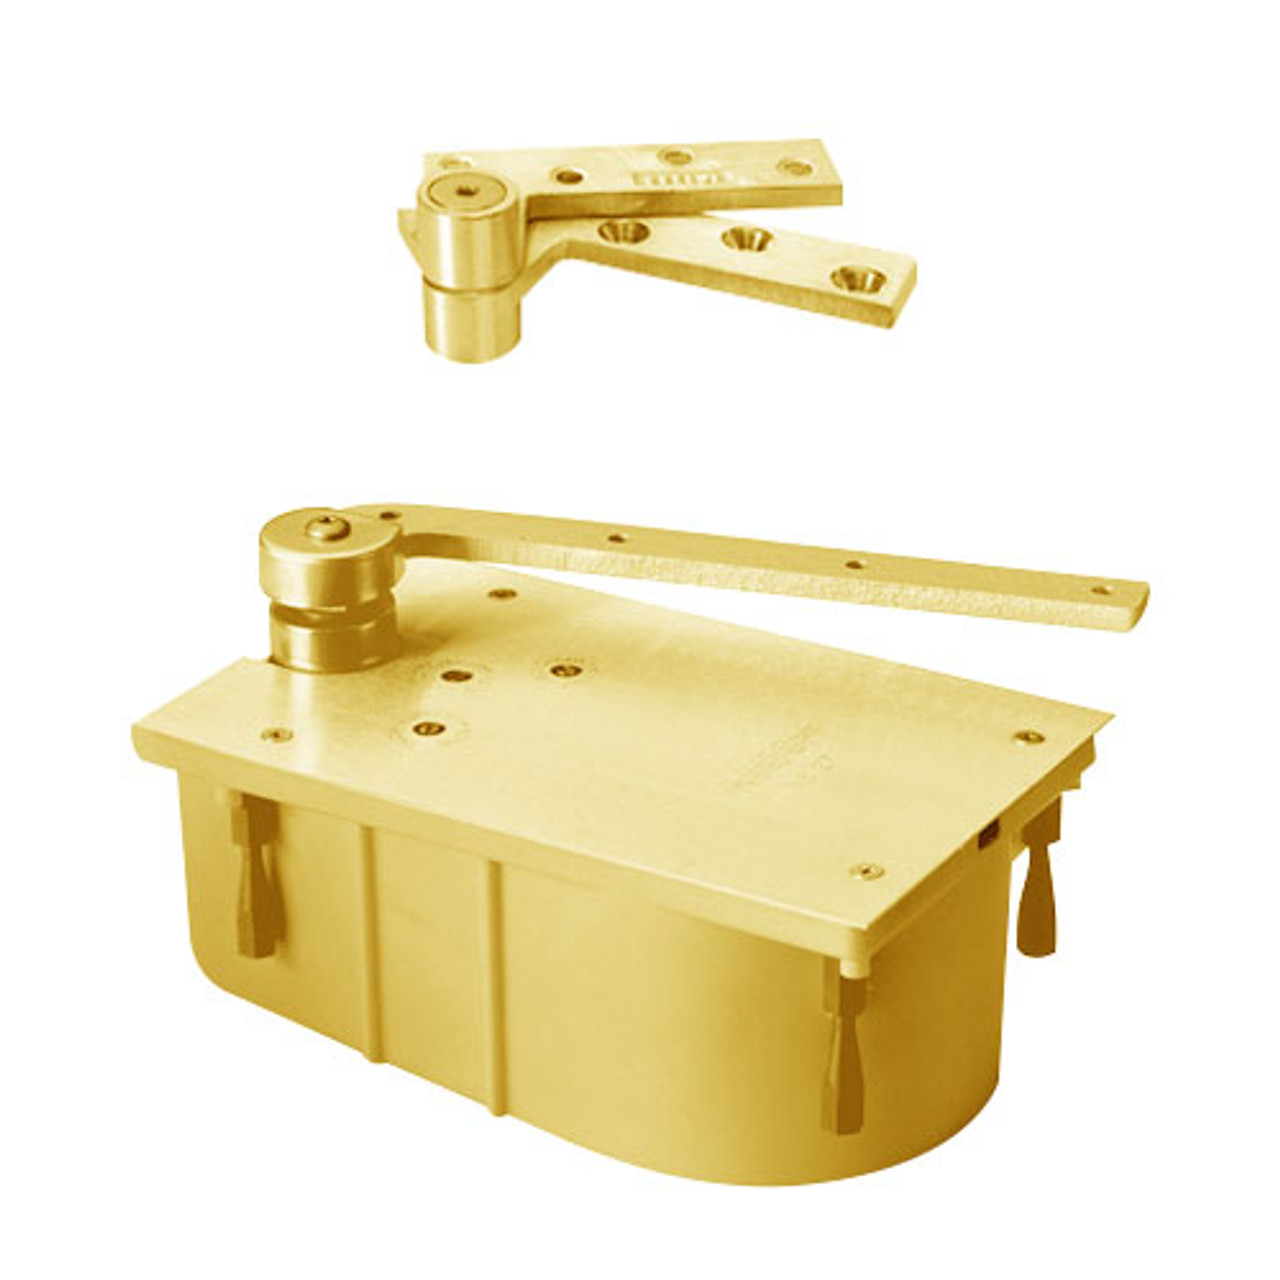 127-90S-LH-605 Rixson 127 Series Heavy Duty 3/4" Offset Hung Floor Closer in Bright Brass Finish